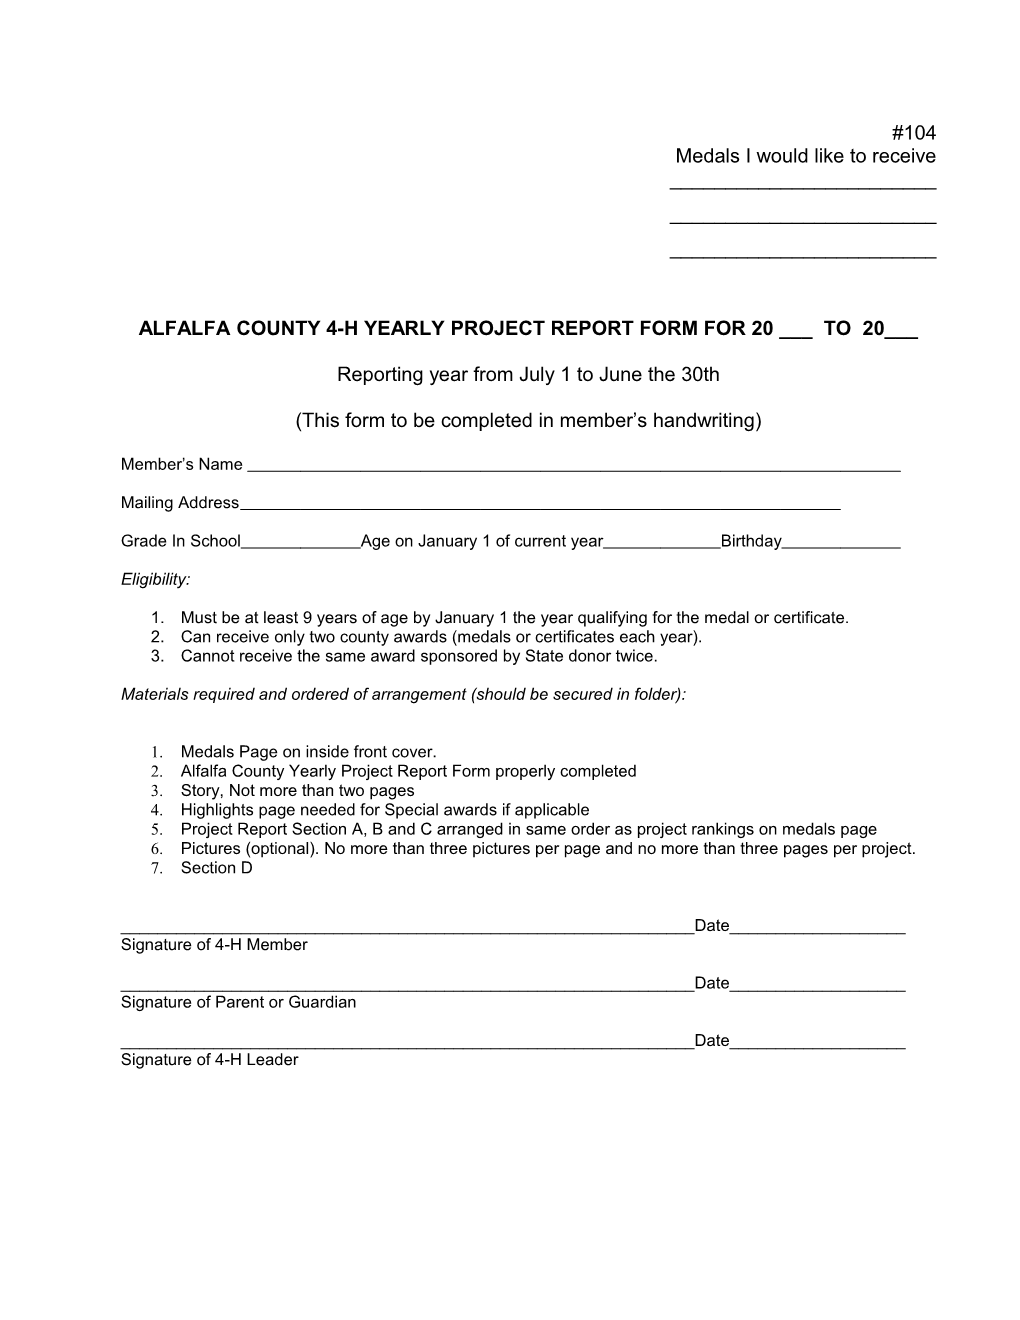 Alfalfa County 4-H Yearly Project Report Form for 20 ___ to 20___